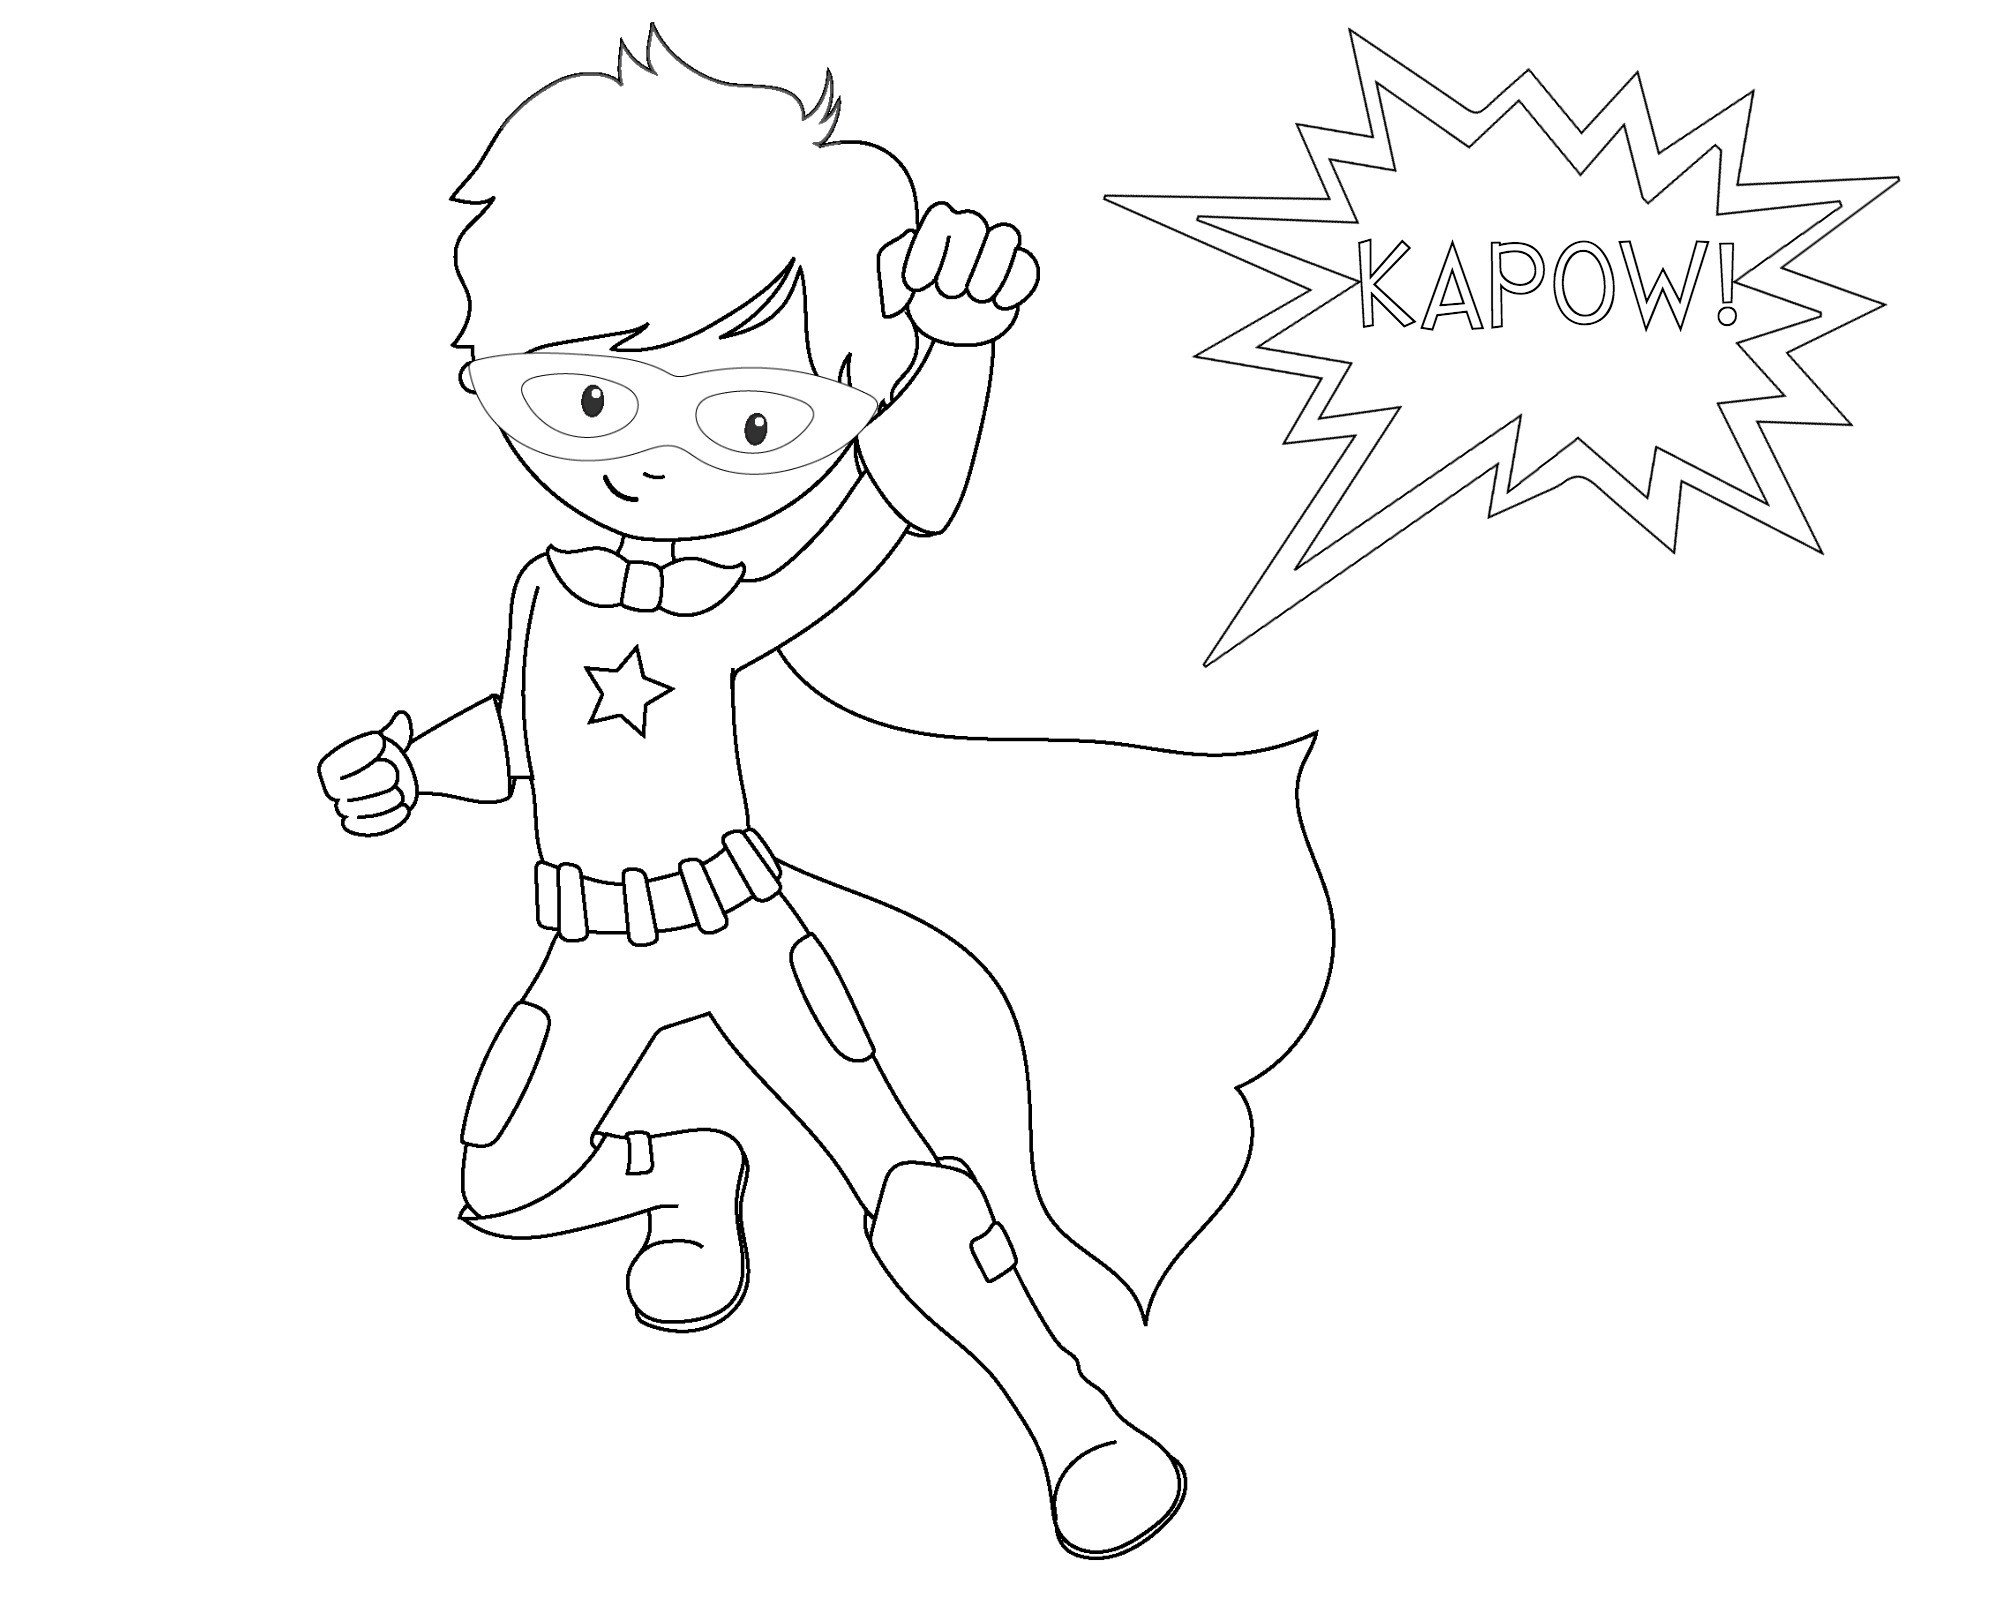 Super Heroes Coloring Page Free Printable Superhero Coloring Sheets for Kids Crazy